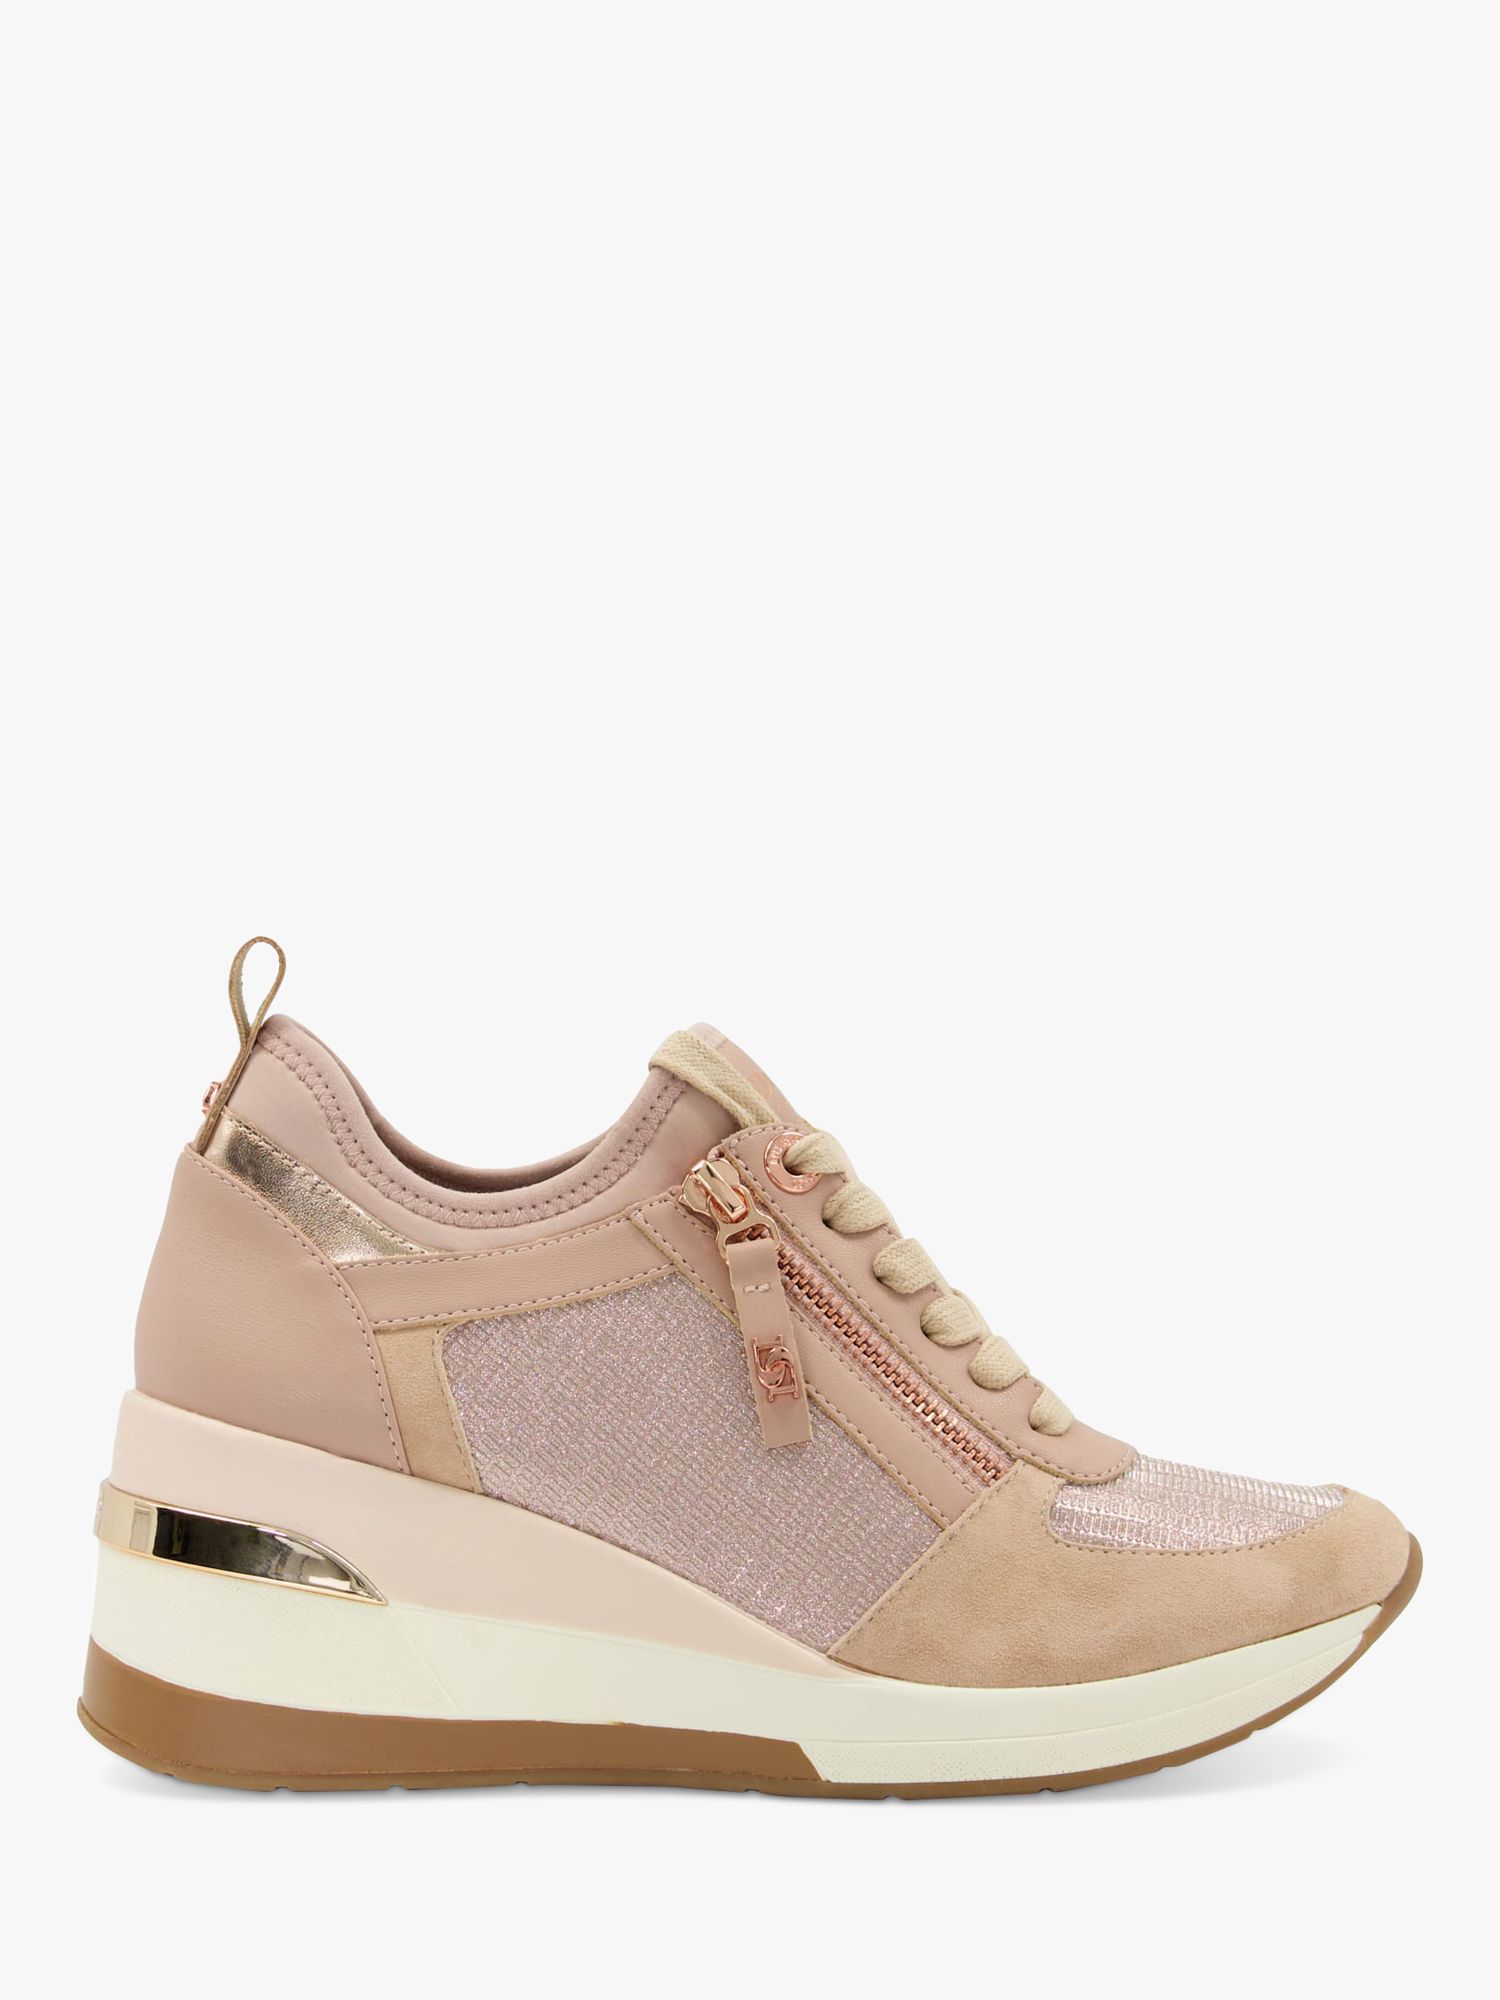 Dune Eilin Leather Wedge Heel Trainers, Rose Gold at John Lewis & Partners